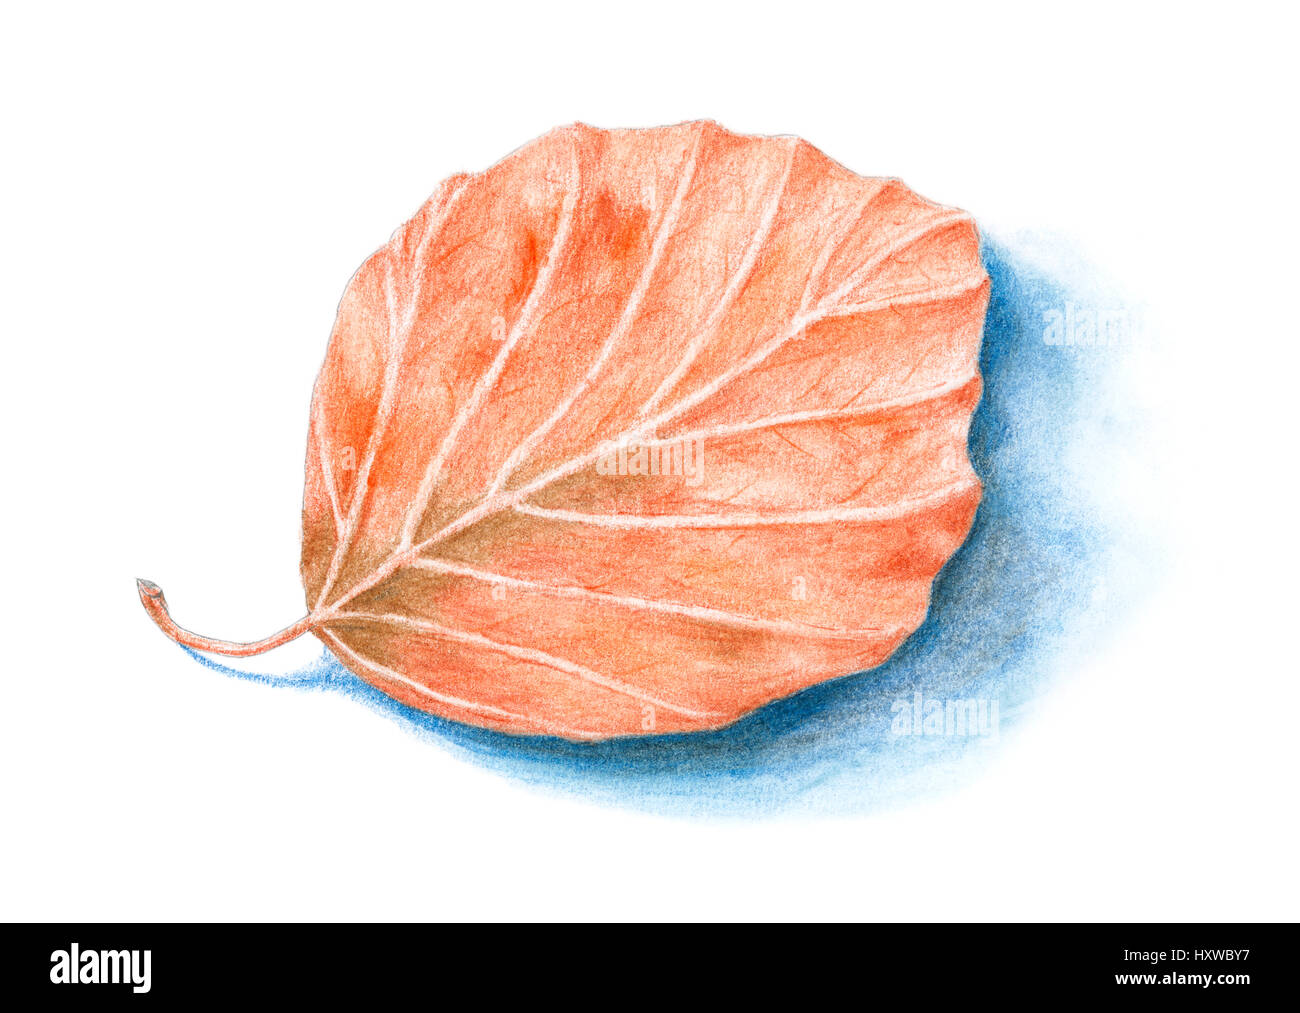 Fallen Common Beech (Fagus sylvatica) leaf with shadow over white background. Colored pencils on paper. Stock Photo